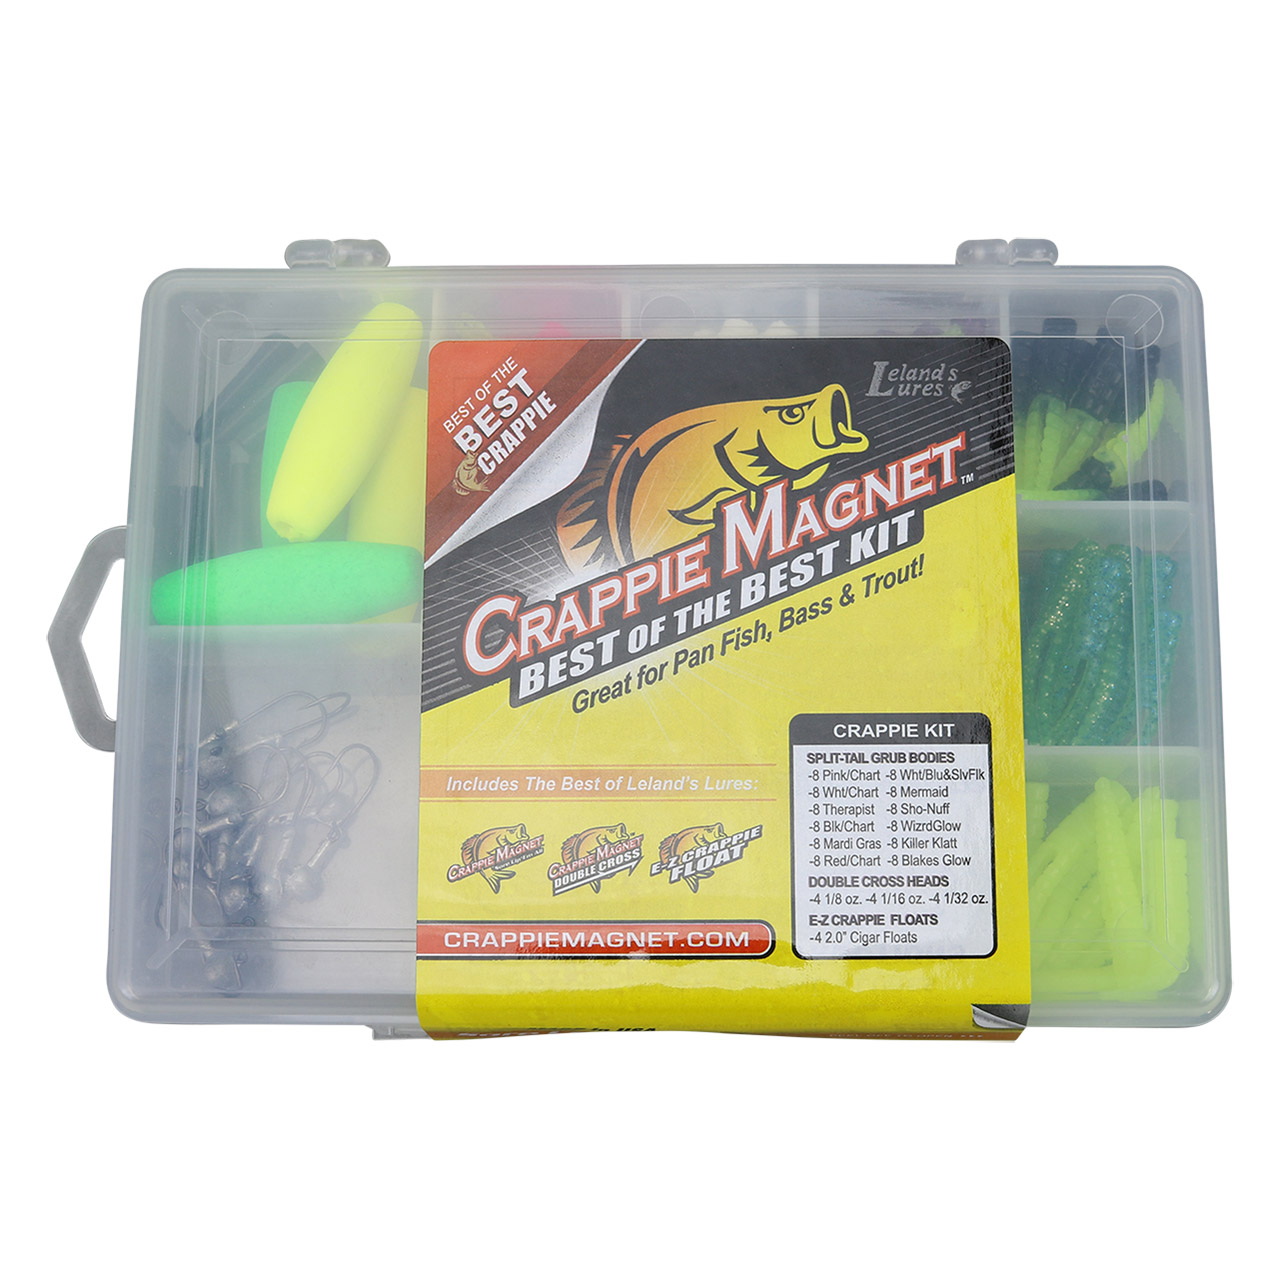 Leland's Lures Crappie Magnet Best of the Best Kit - FishUSA